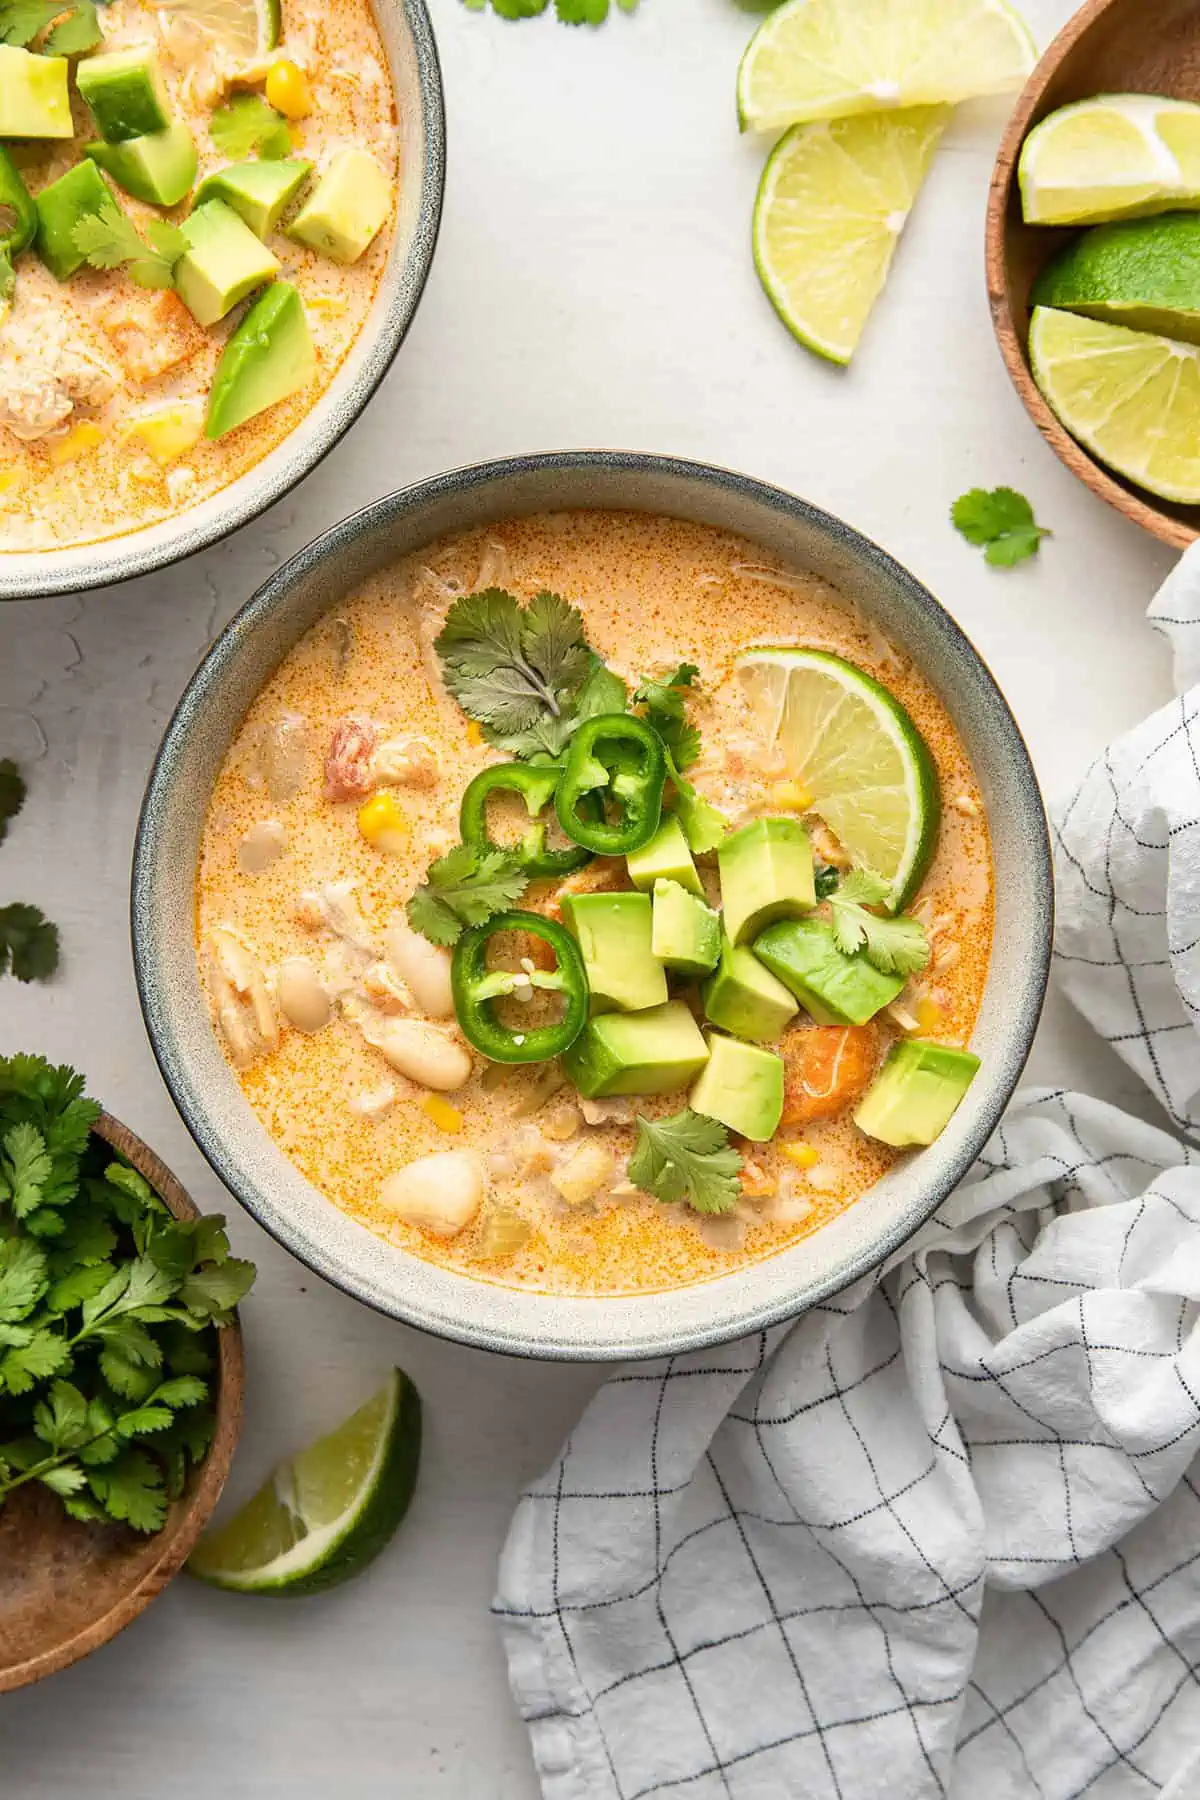 Overhead view of a bowl of white chicken chili topped with limi, chilis, avocado, and cilantro, next to another bowl of chili, a bowl of cilantro, and lime wedges